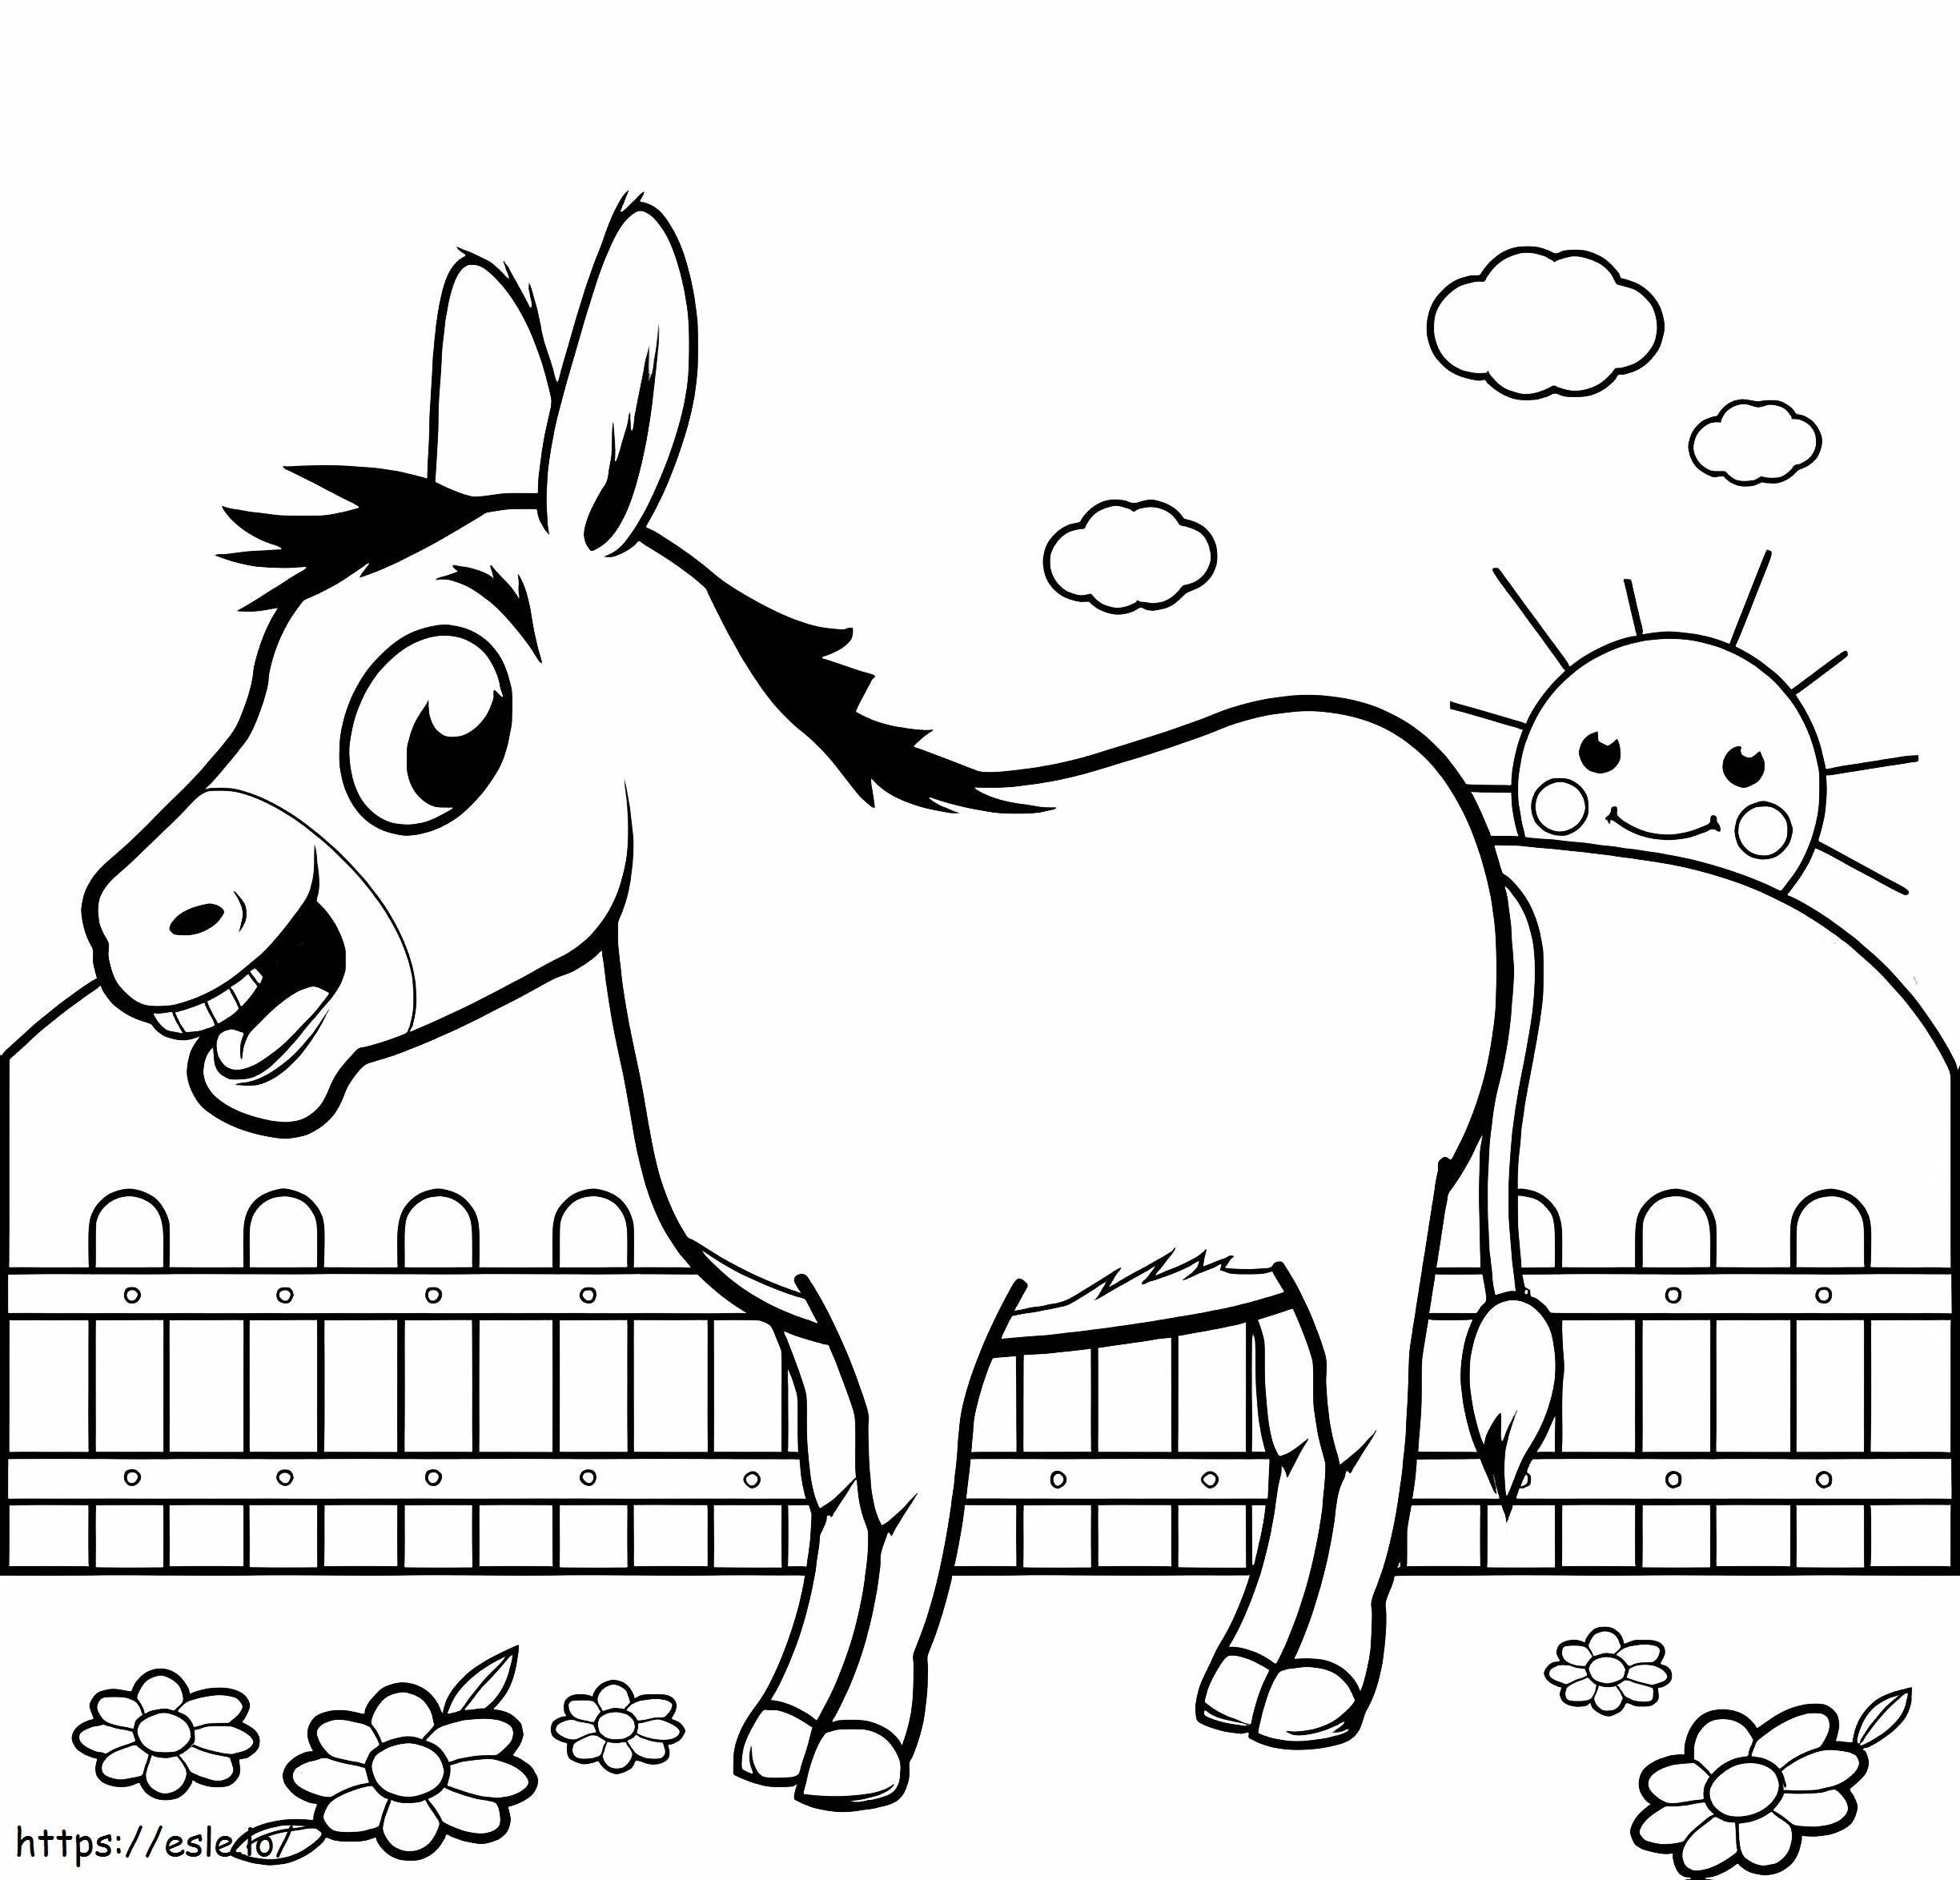 Funny Donkey coloring page